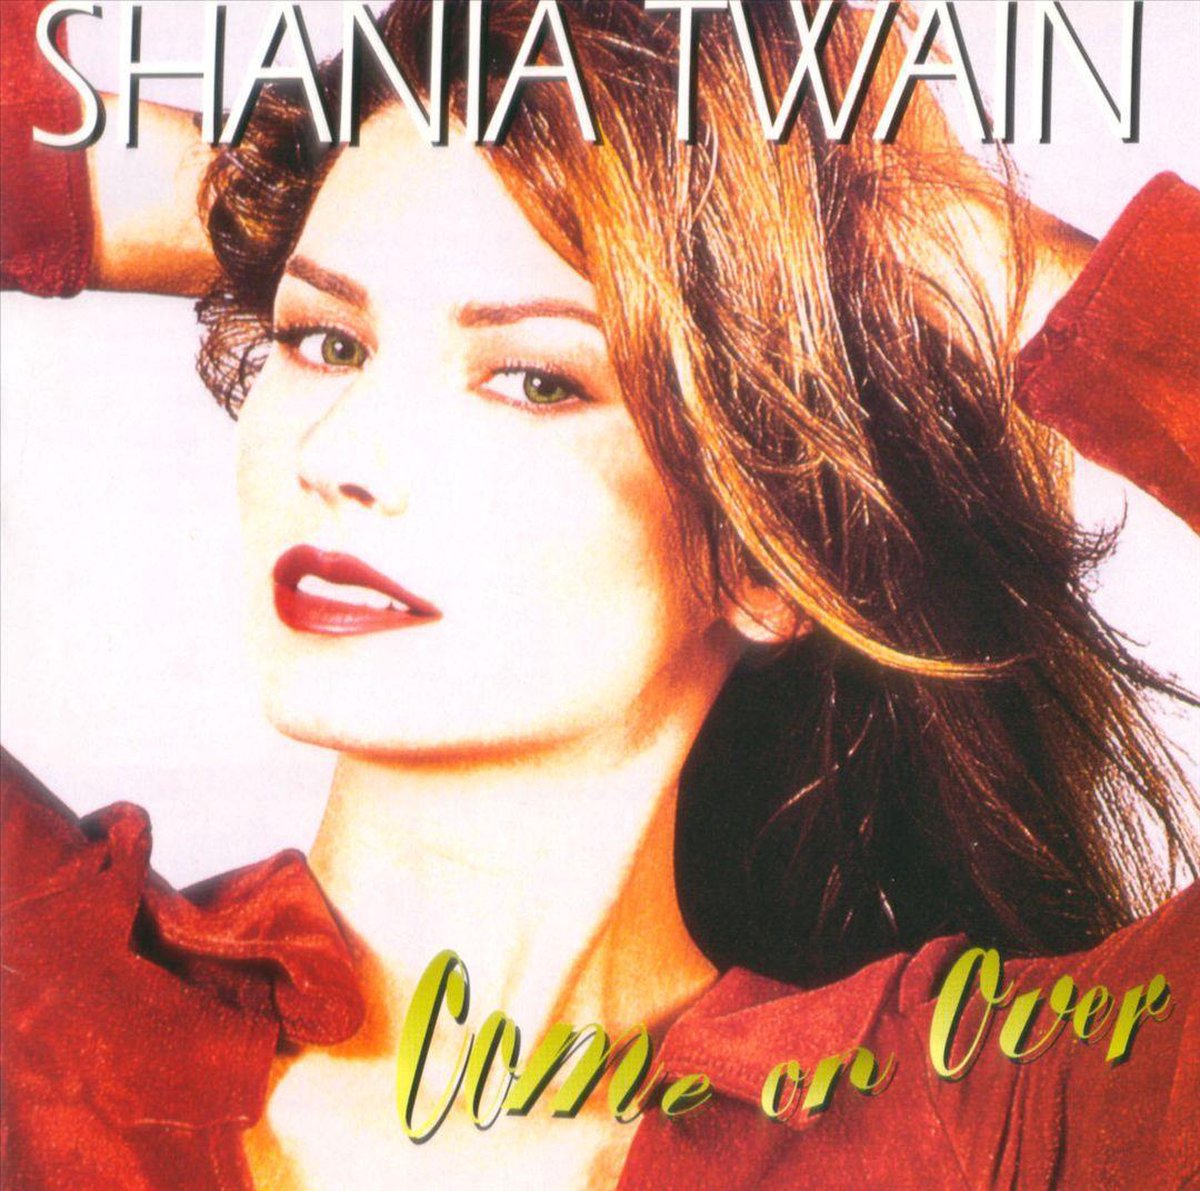 Come on Over (LP) - Shania Twain